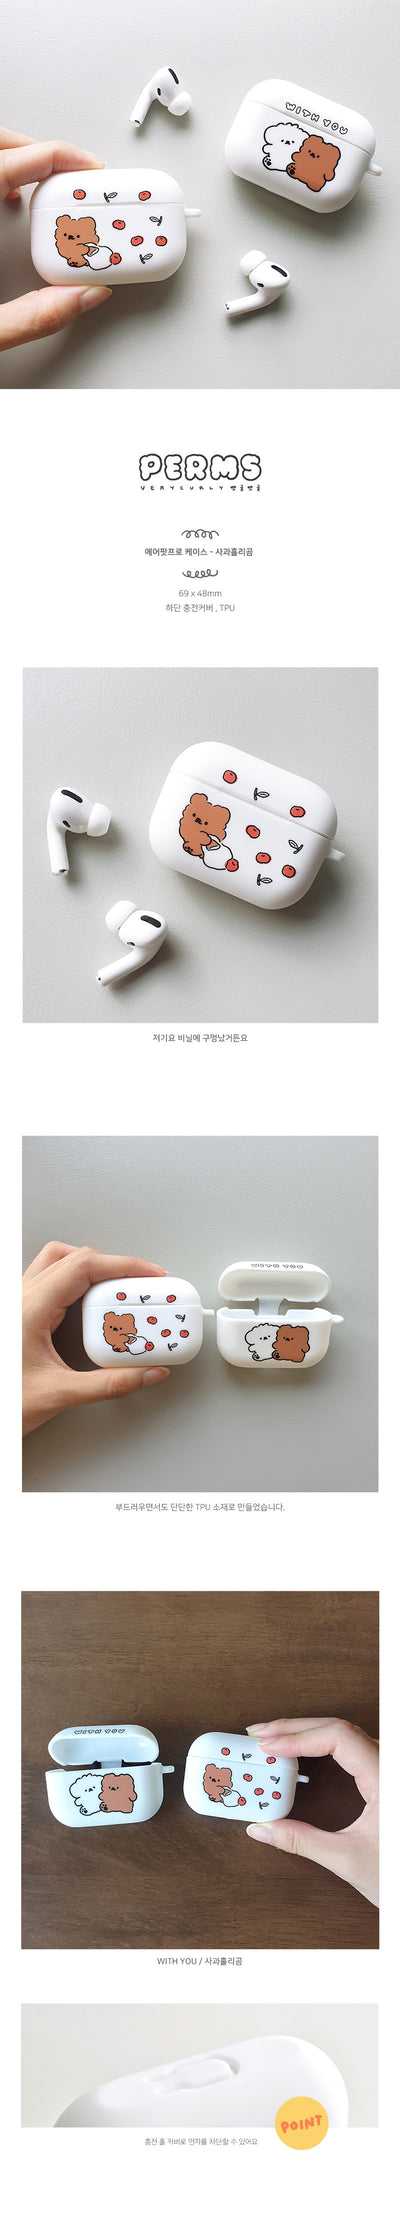 AirPods Proケース_リンゴこぼしクマ